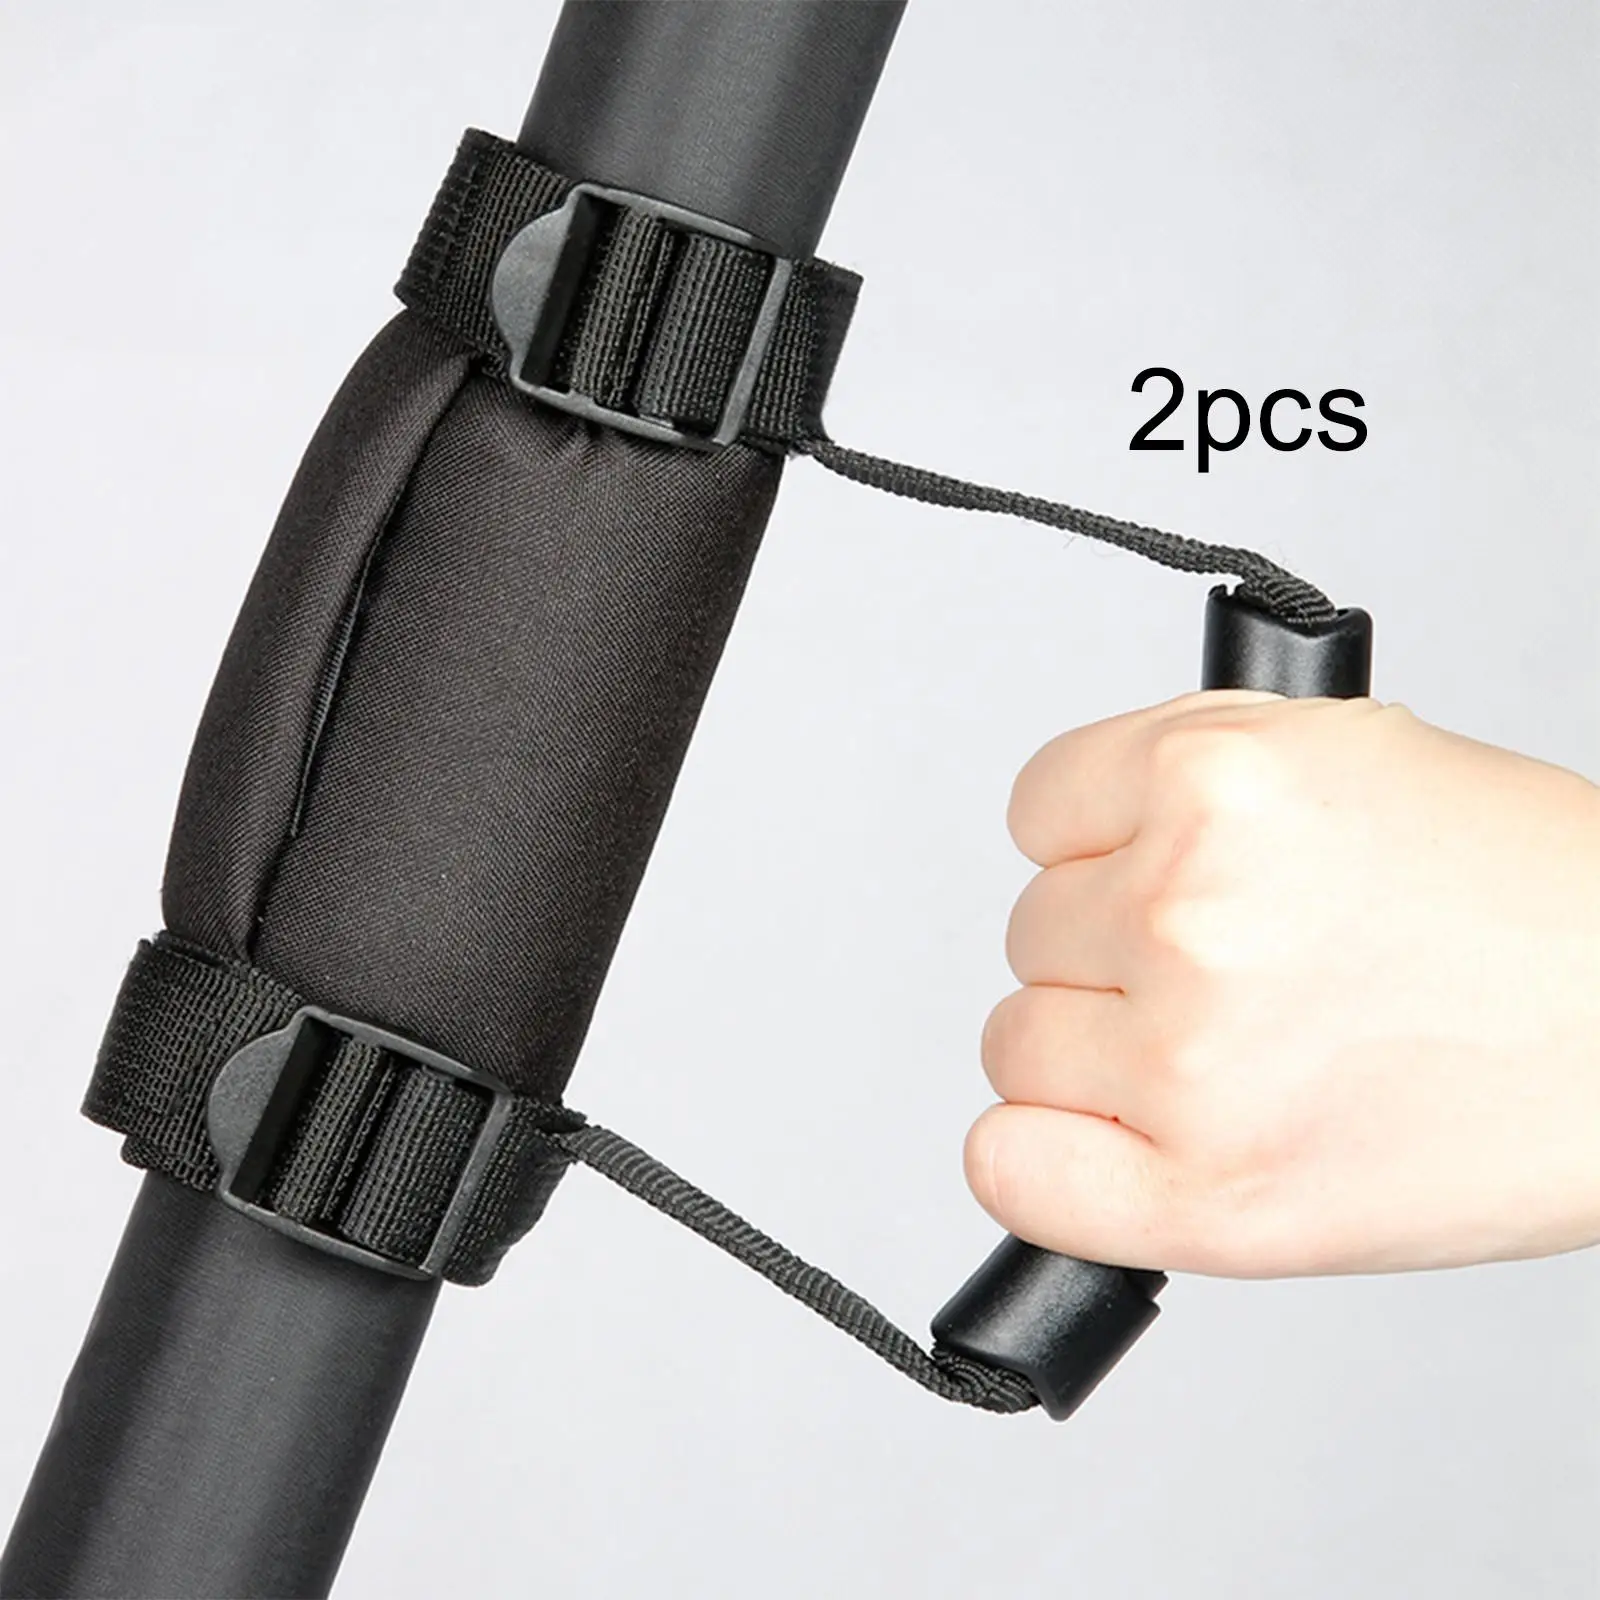 2x Replacement Roll Cage Grab Bar Handles Safe Riding Accessories Safety Straps Grab Handles Hand Hold Hand Grip for ATV UTV